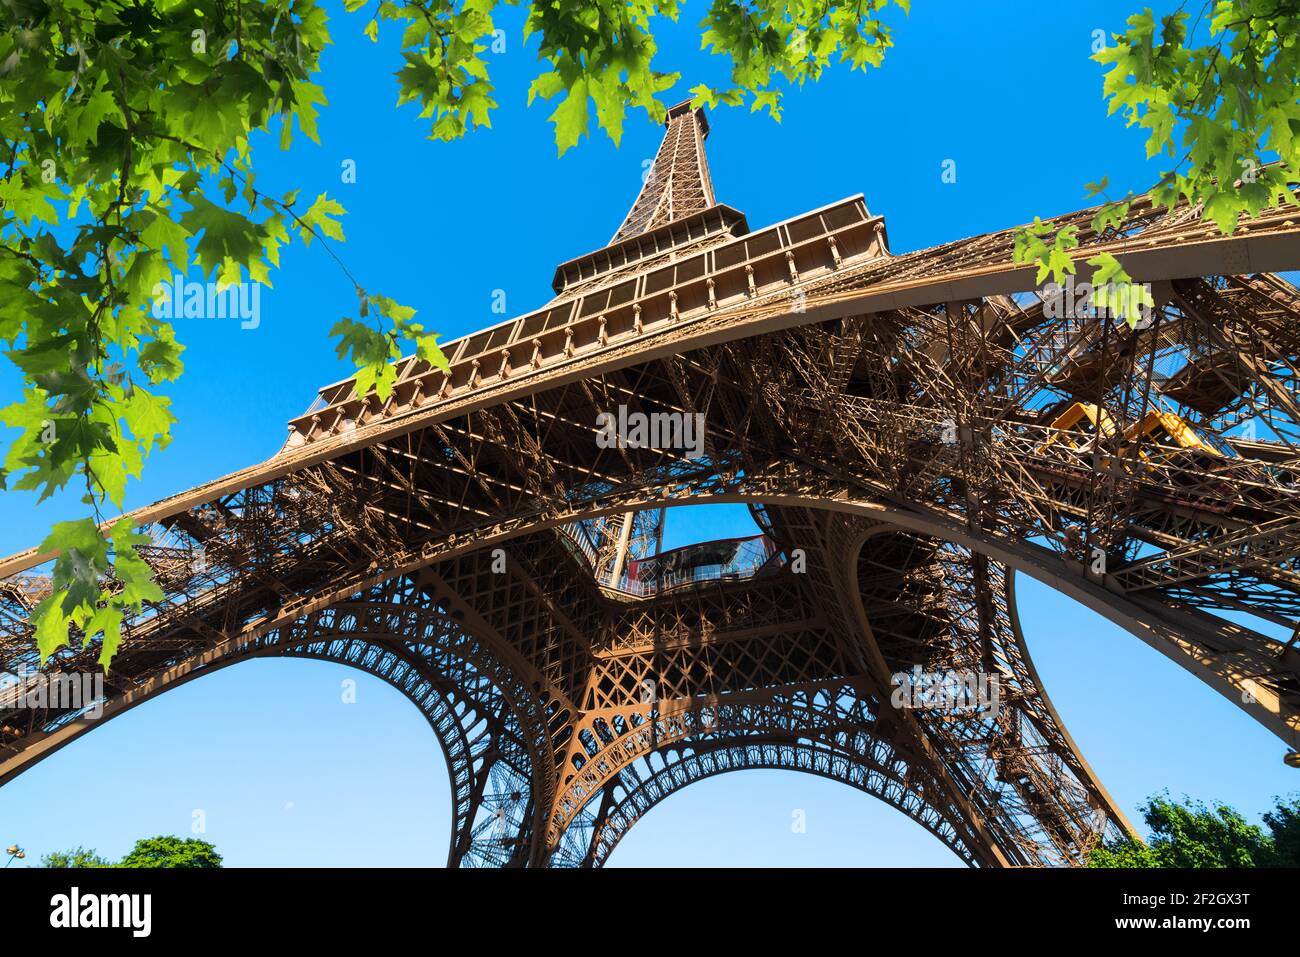 Eiffel Tower in the park of Paris Stock Photo